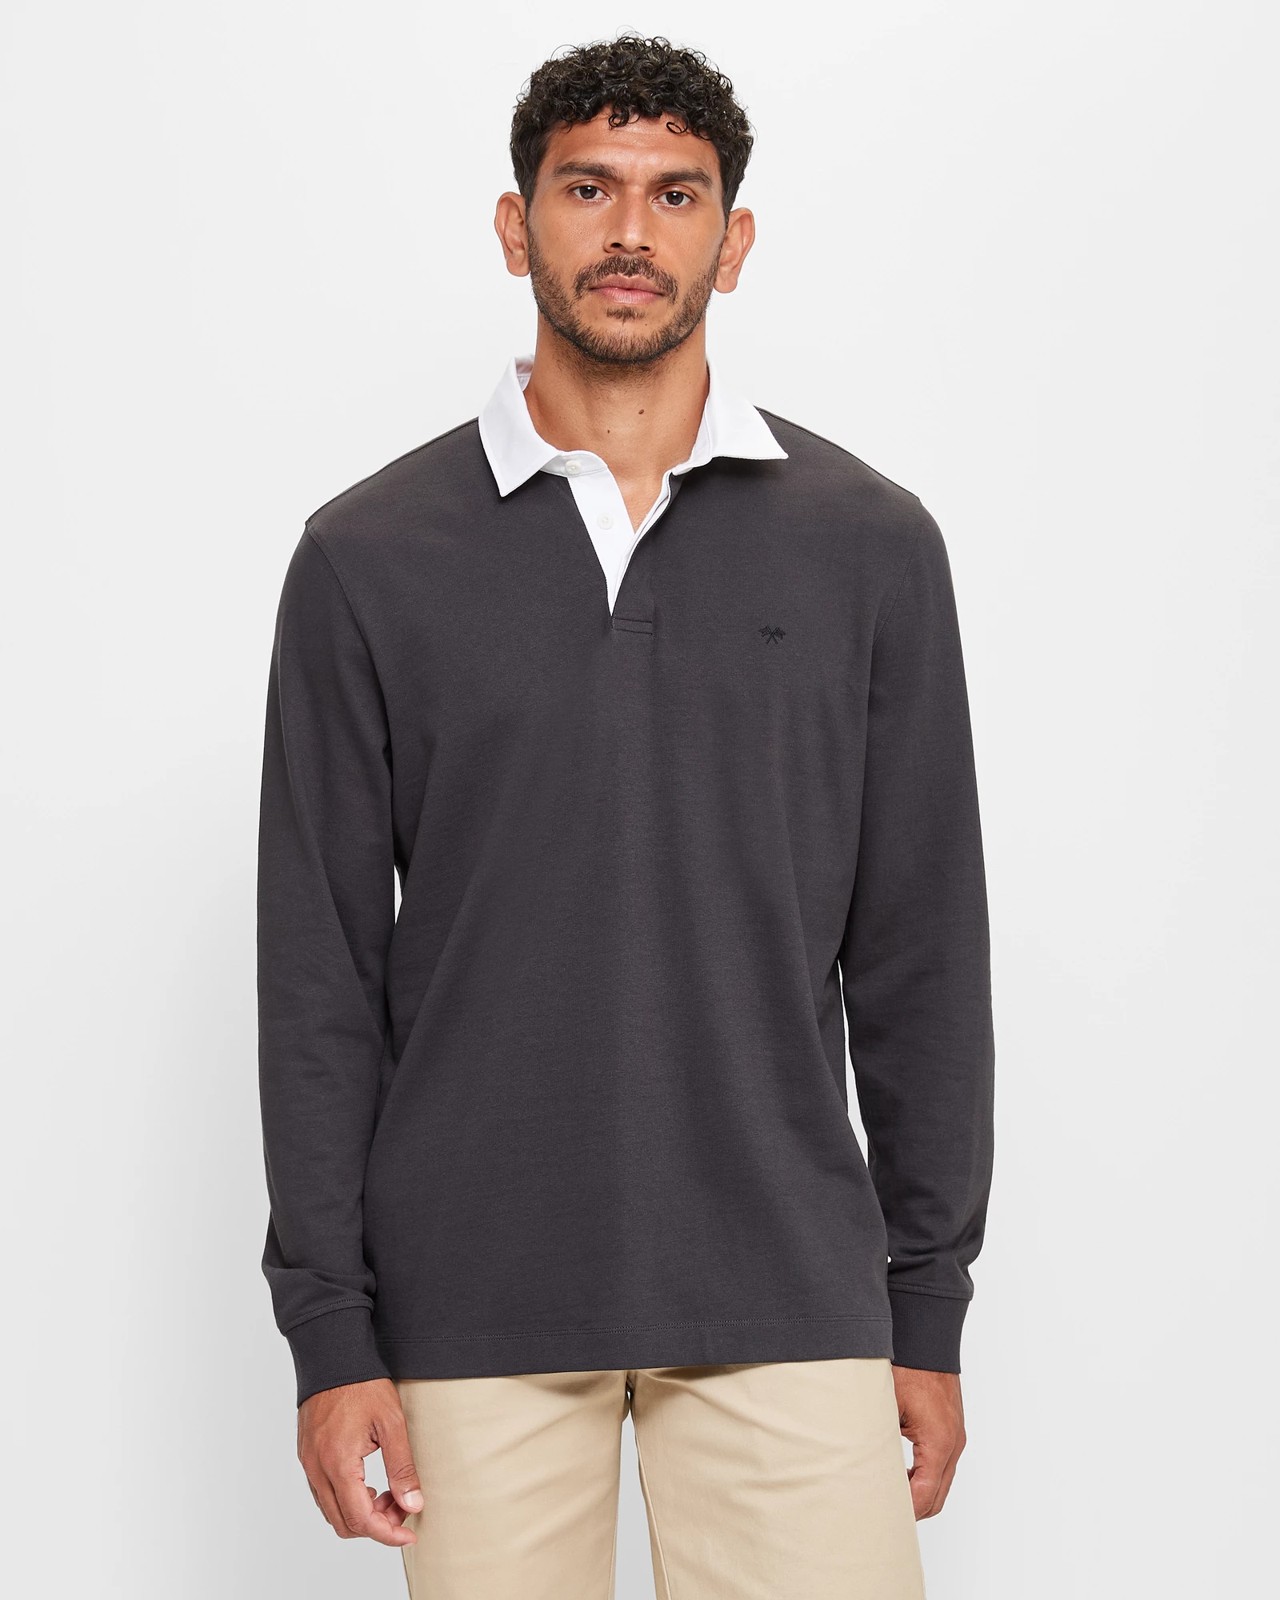 Rugby Polo Shirt - Washed Black | Target Australia